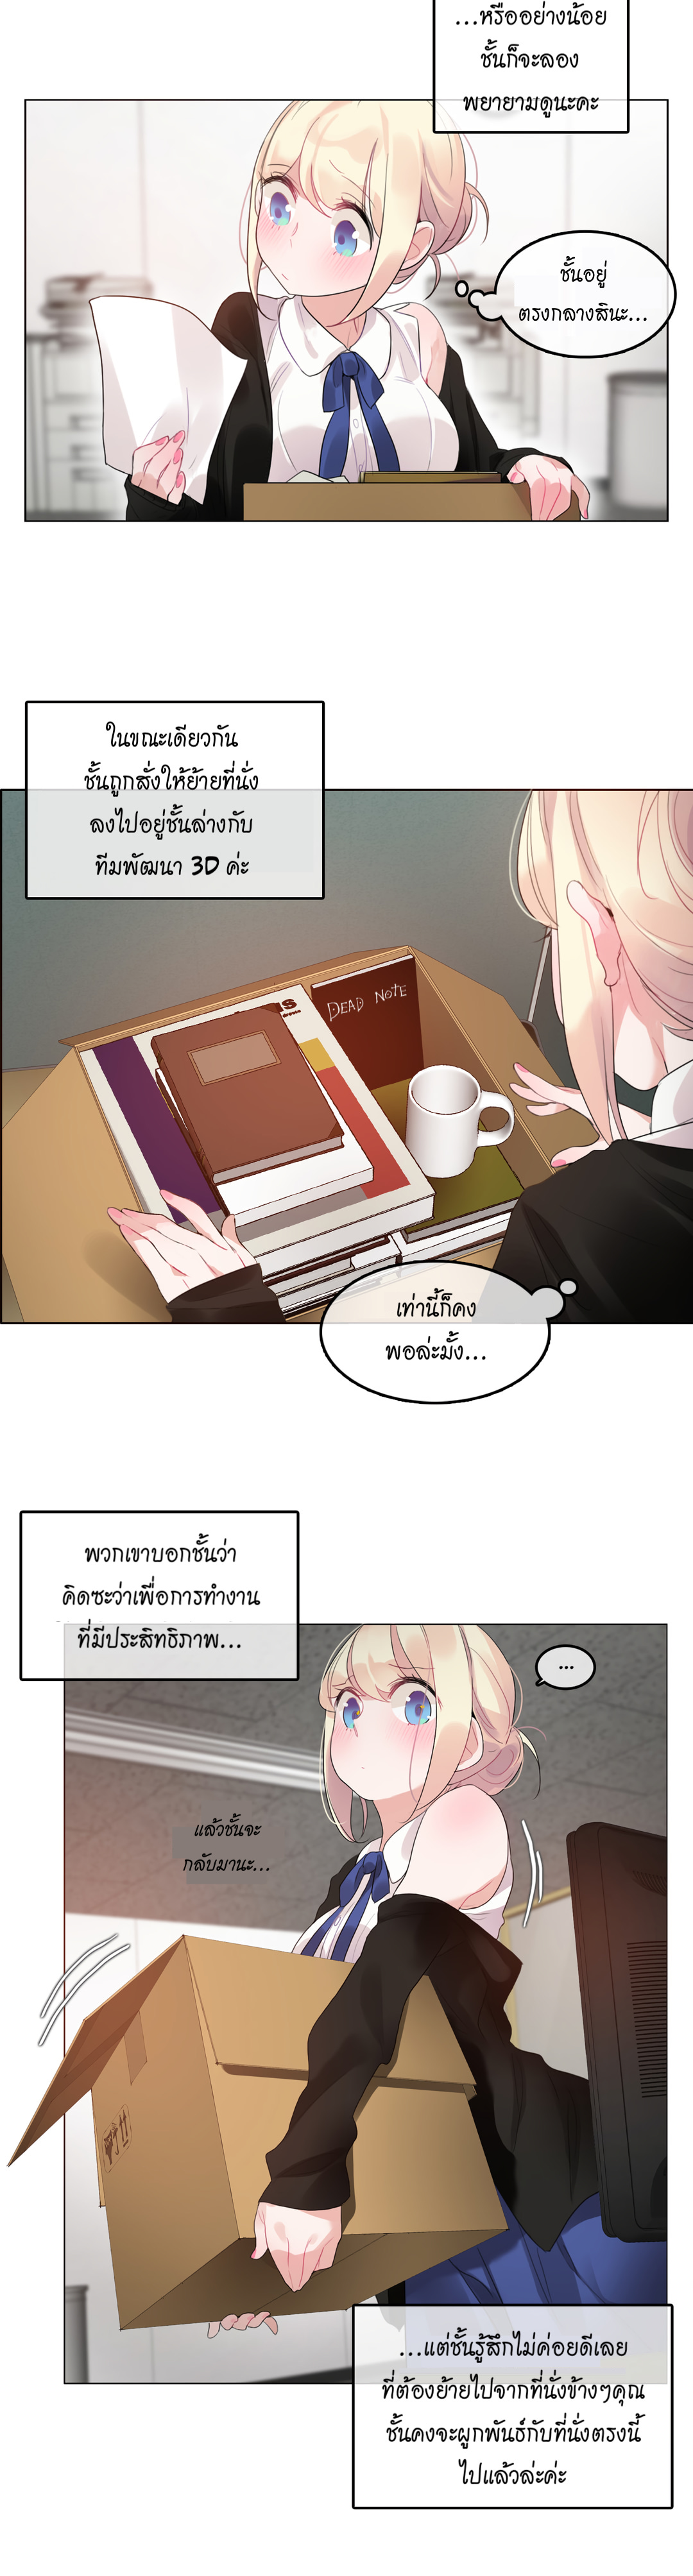 A Pervert’s Daily Life49 (6)